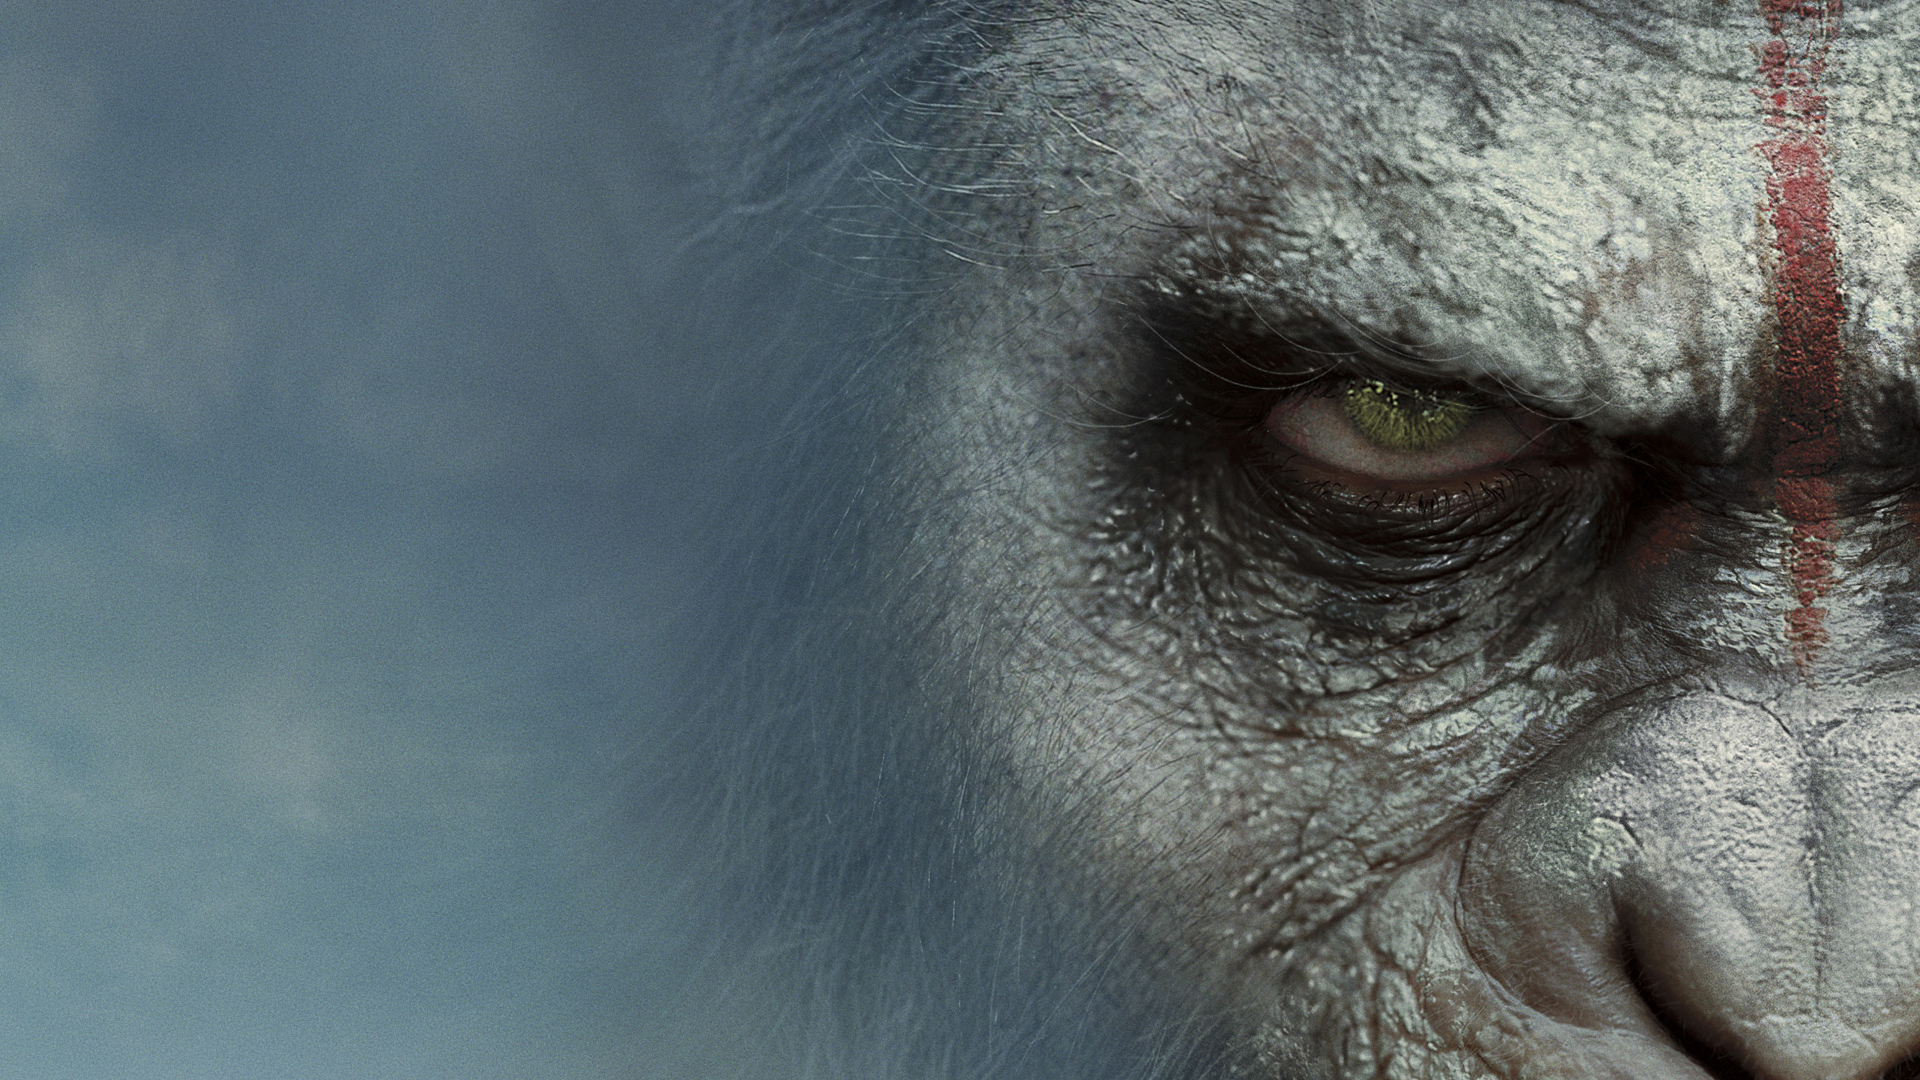 War For The Planet Of The Apes Wallpapers